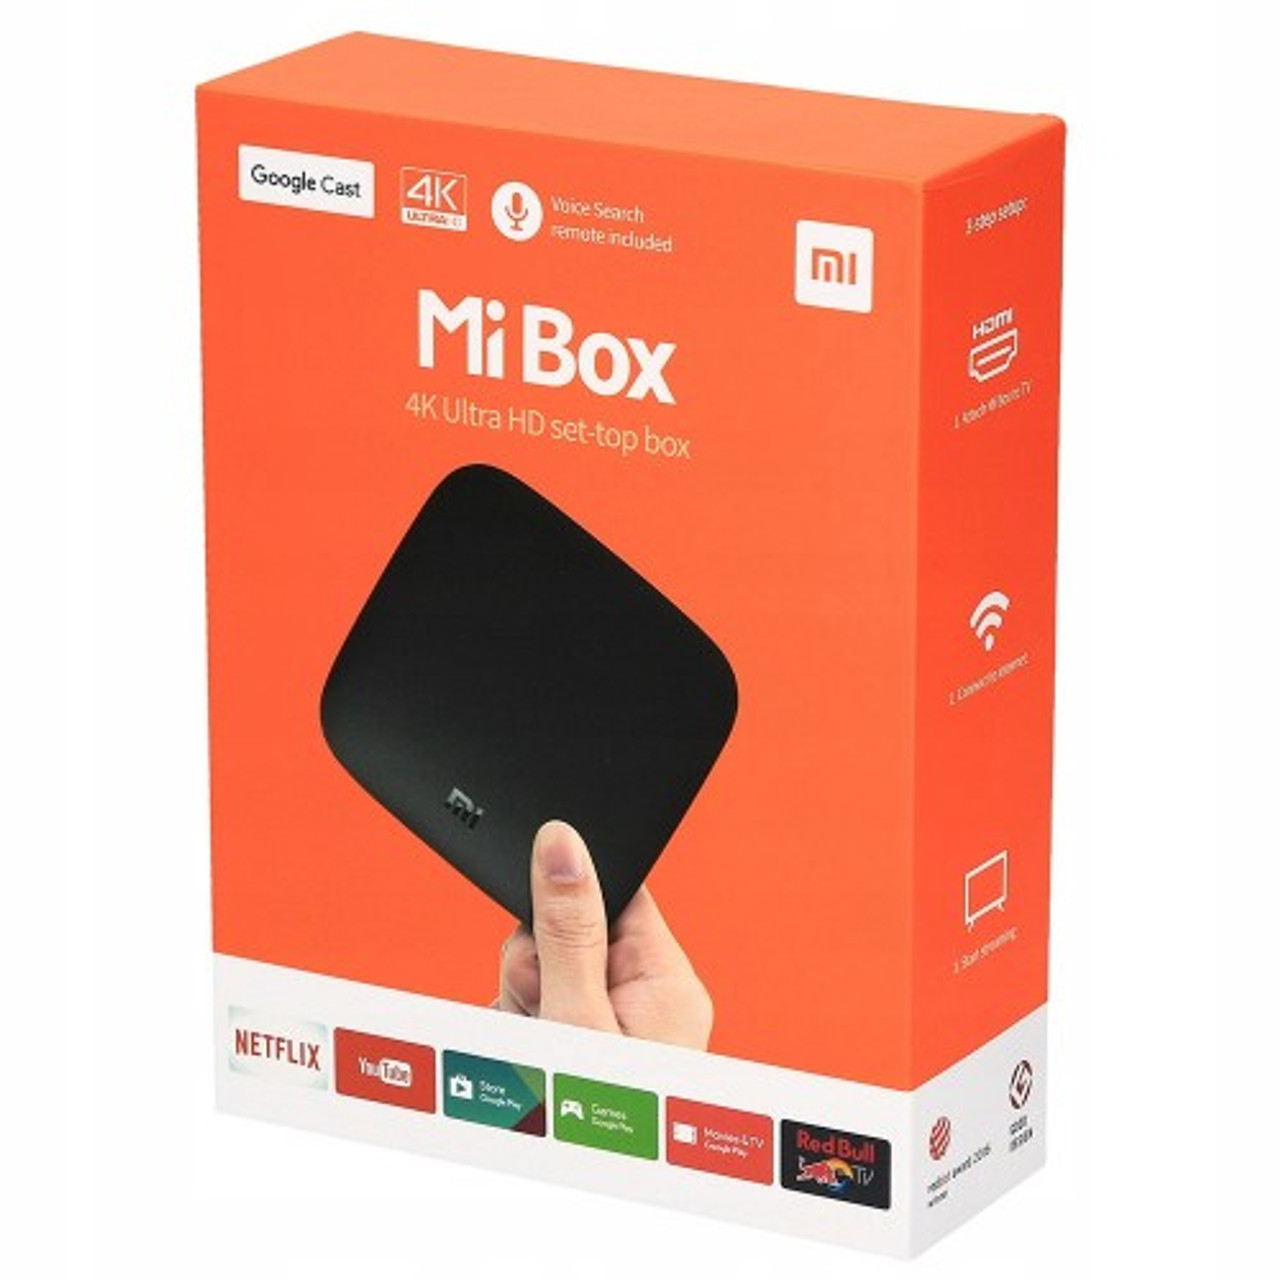  Xiaomi Mi Box S 4K HDR Android TV Remote Streaming